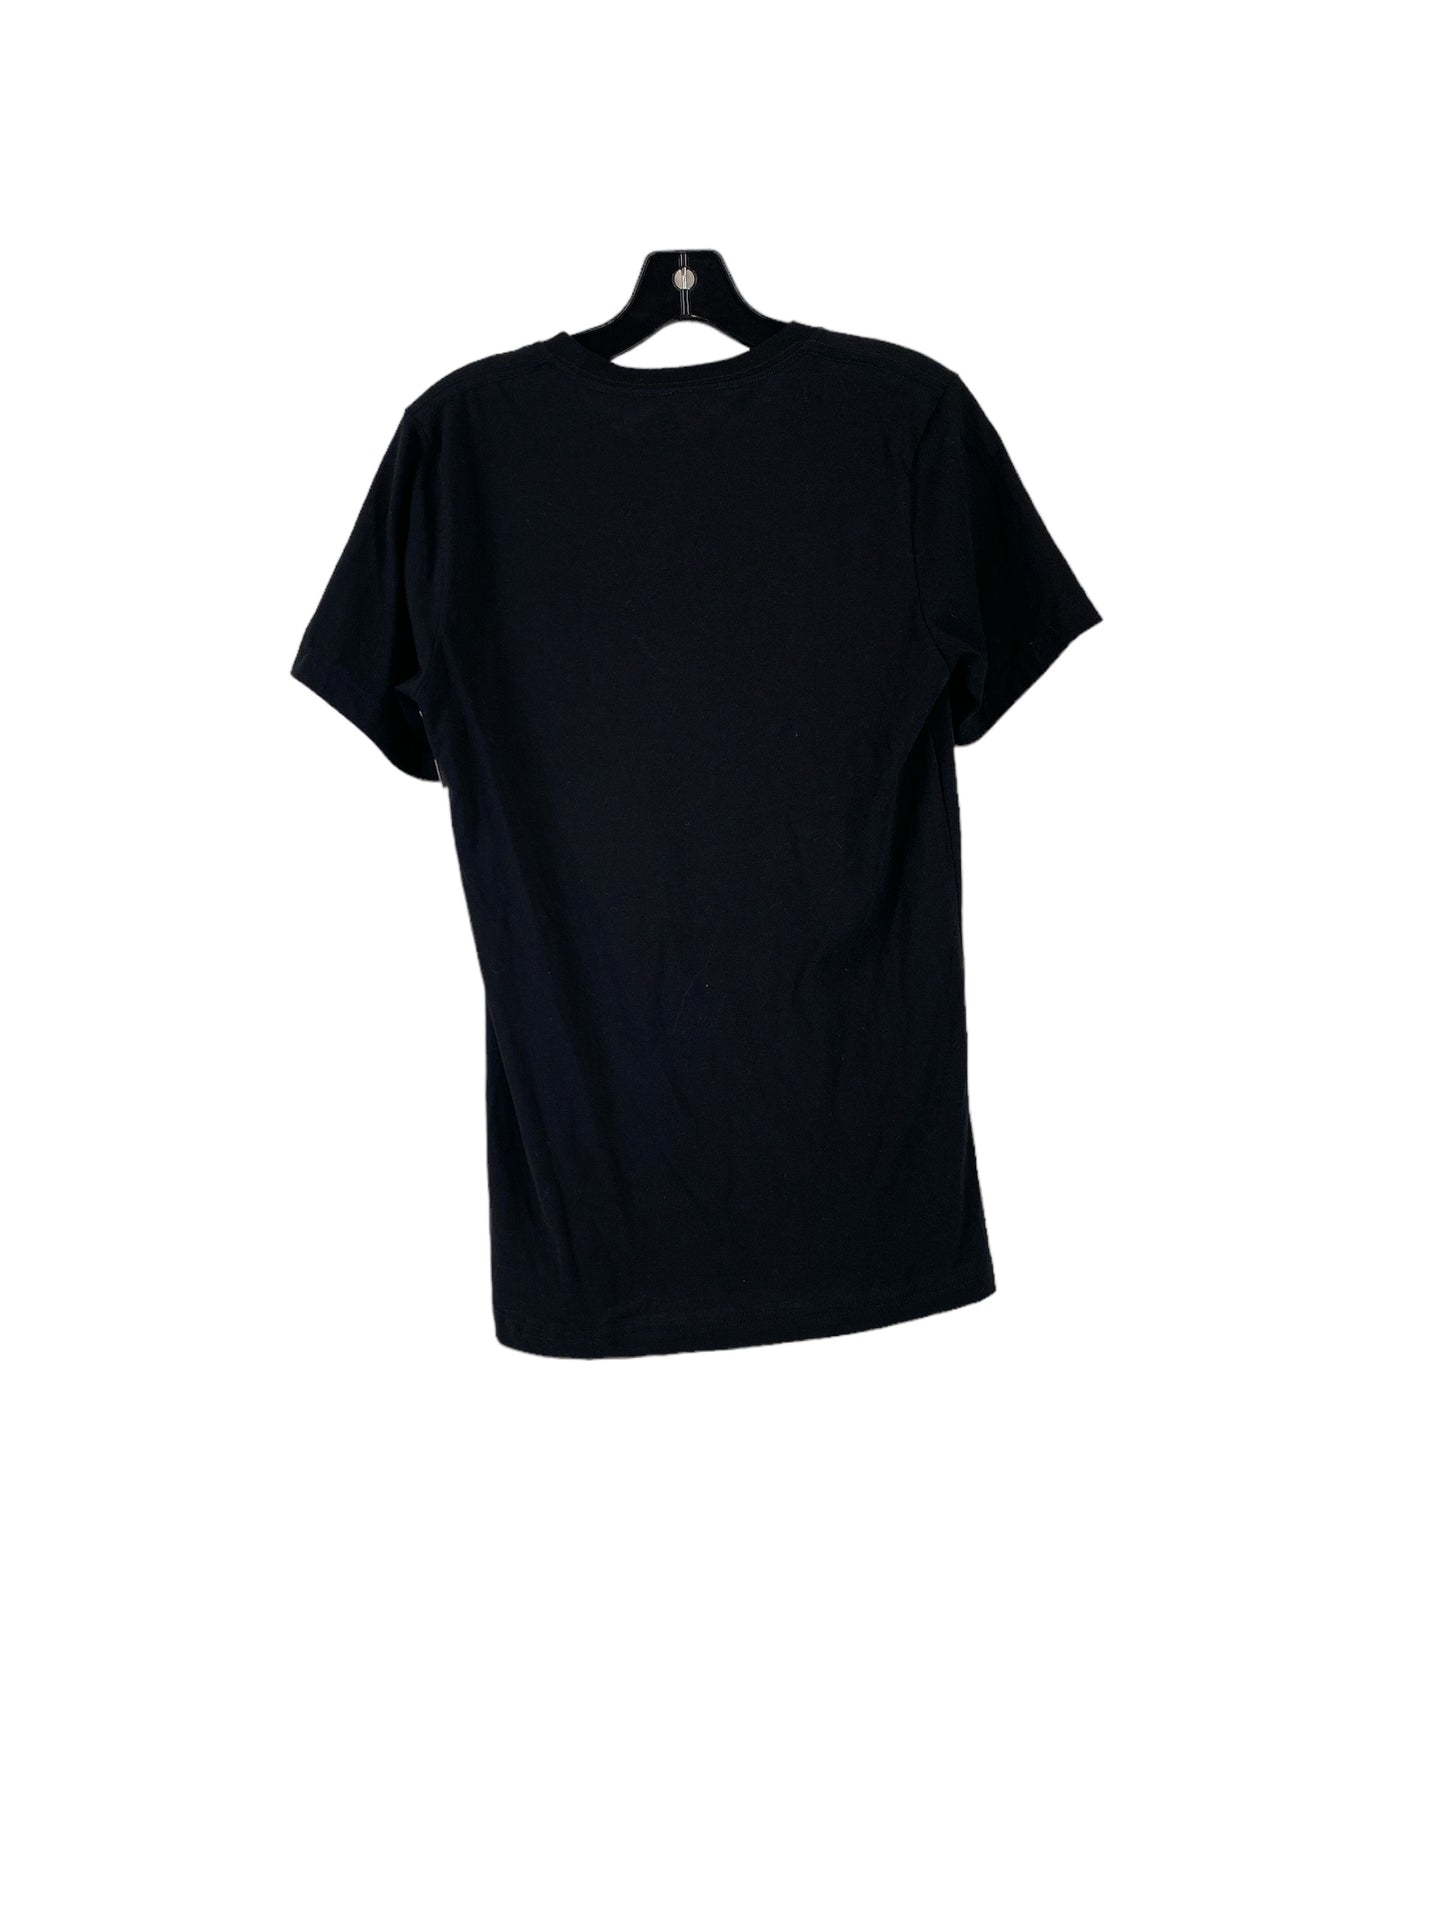 Top Short Sleeve Basic By Canvasback  Size: S